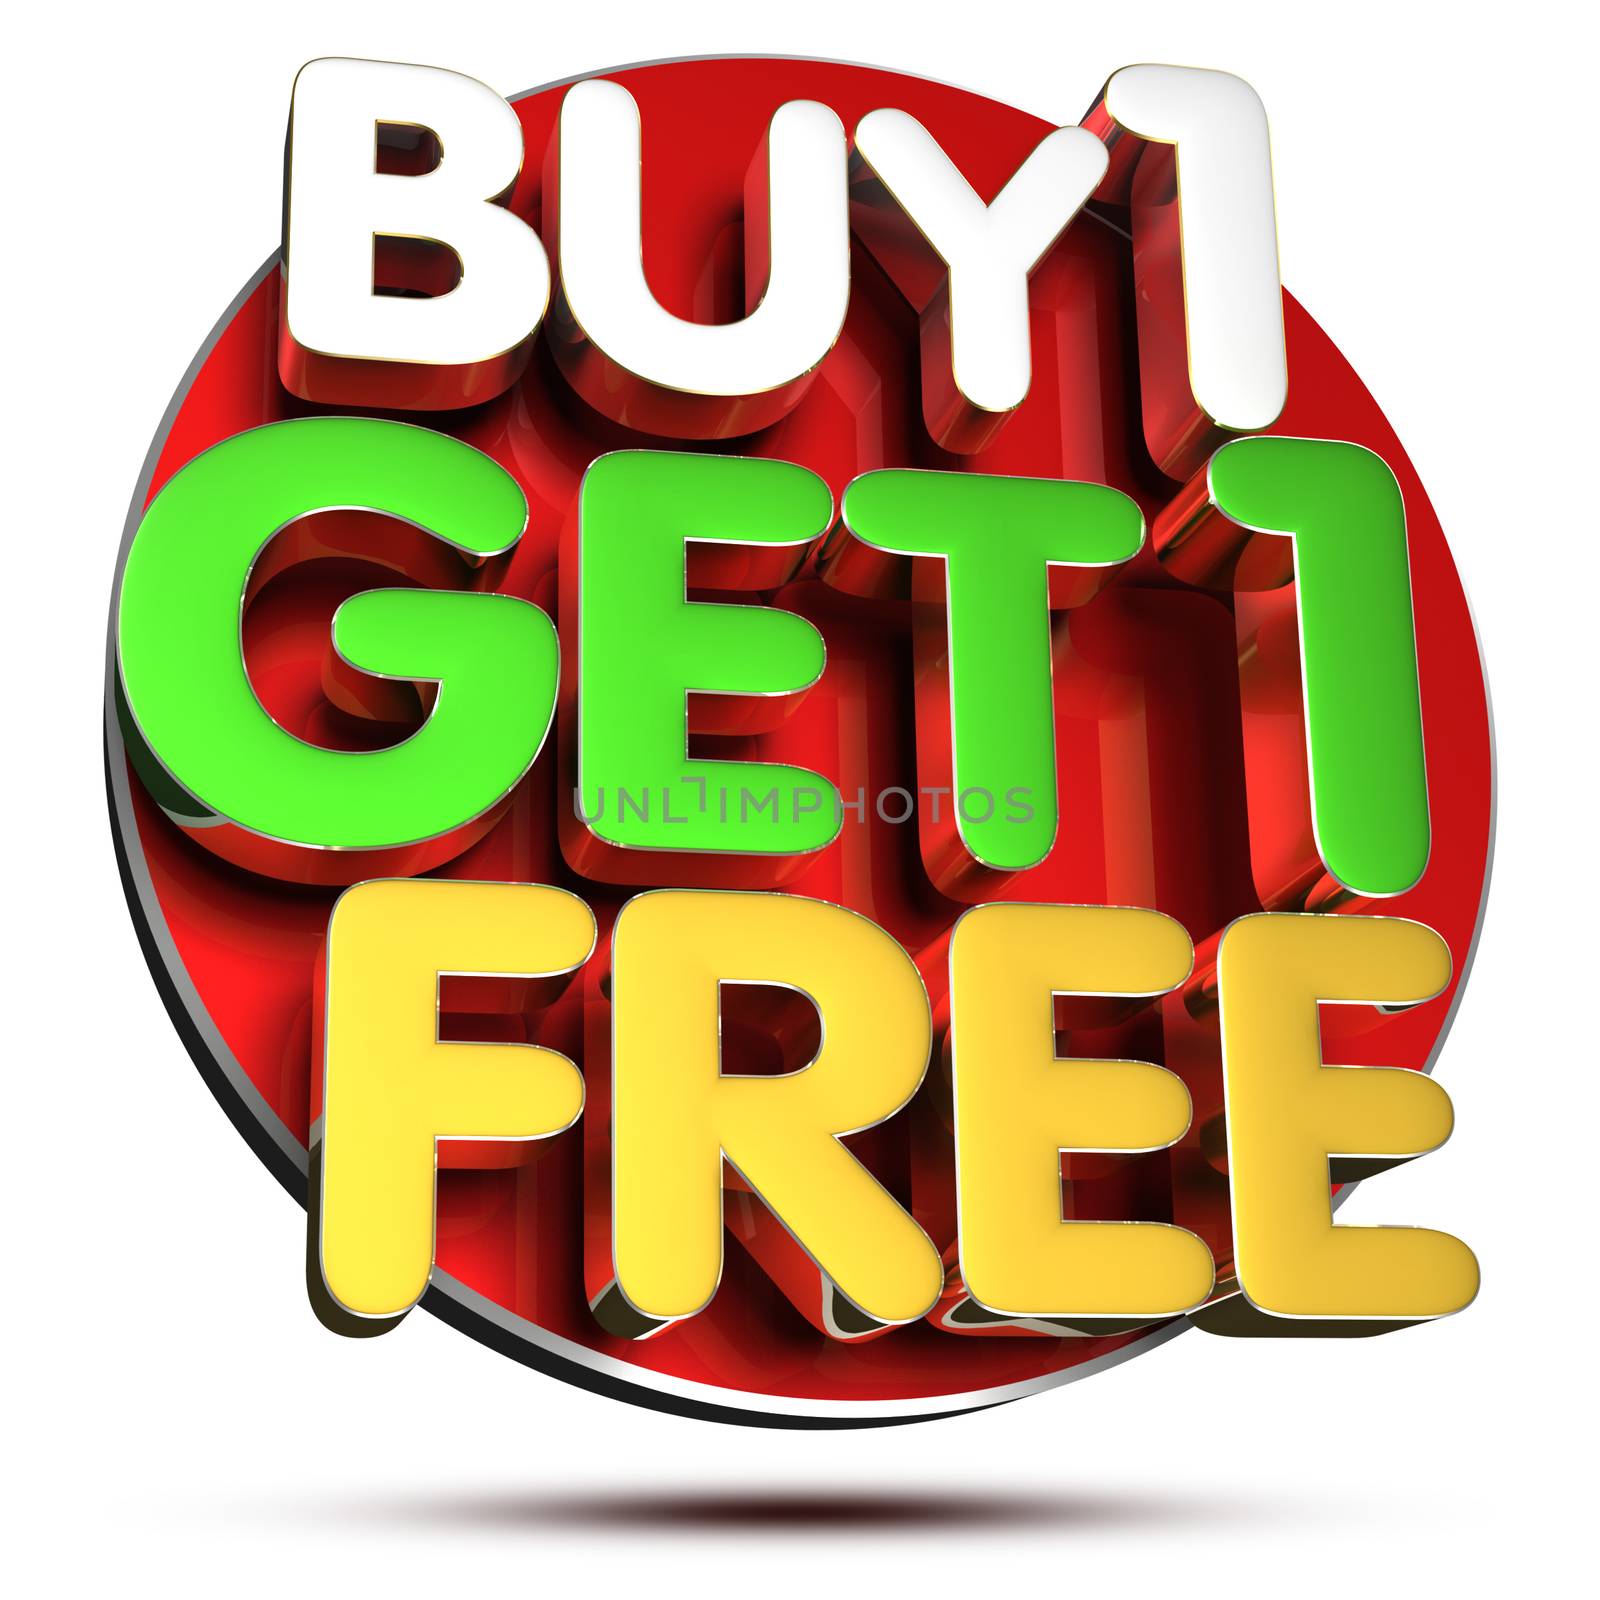 Buy 1 Get 1 Free 3D.(with Clipping Path). by thitimontoyai